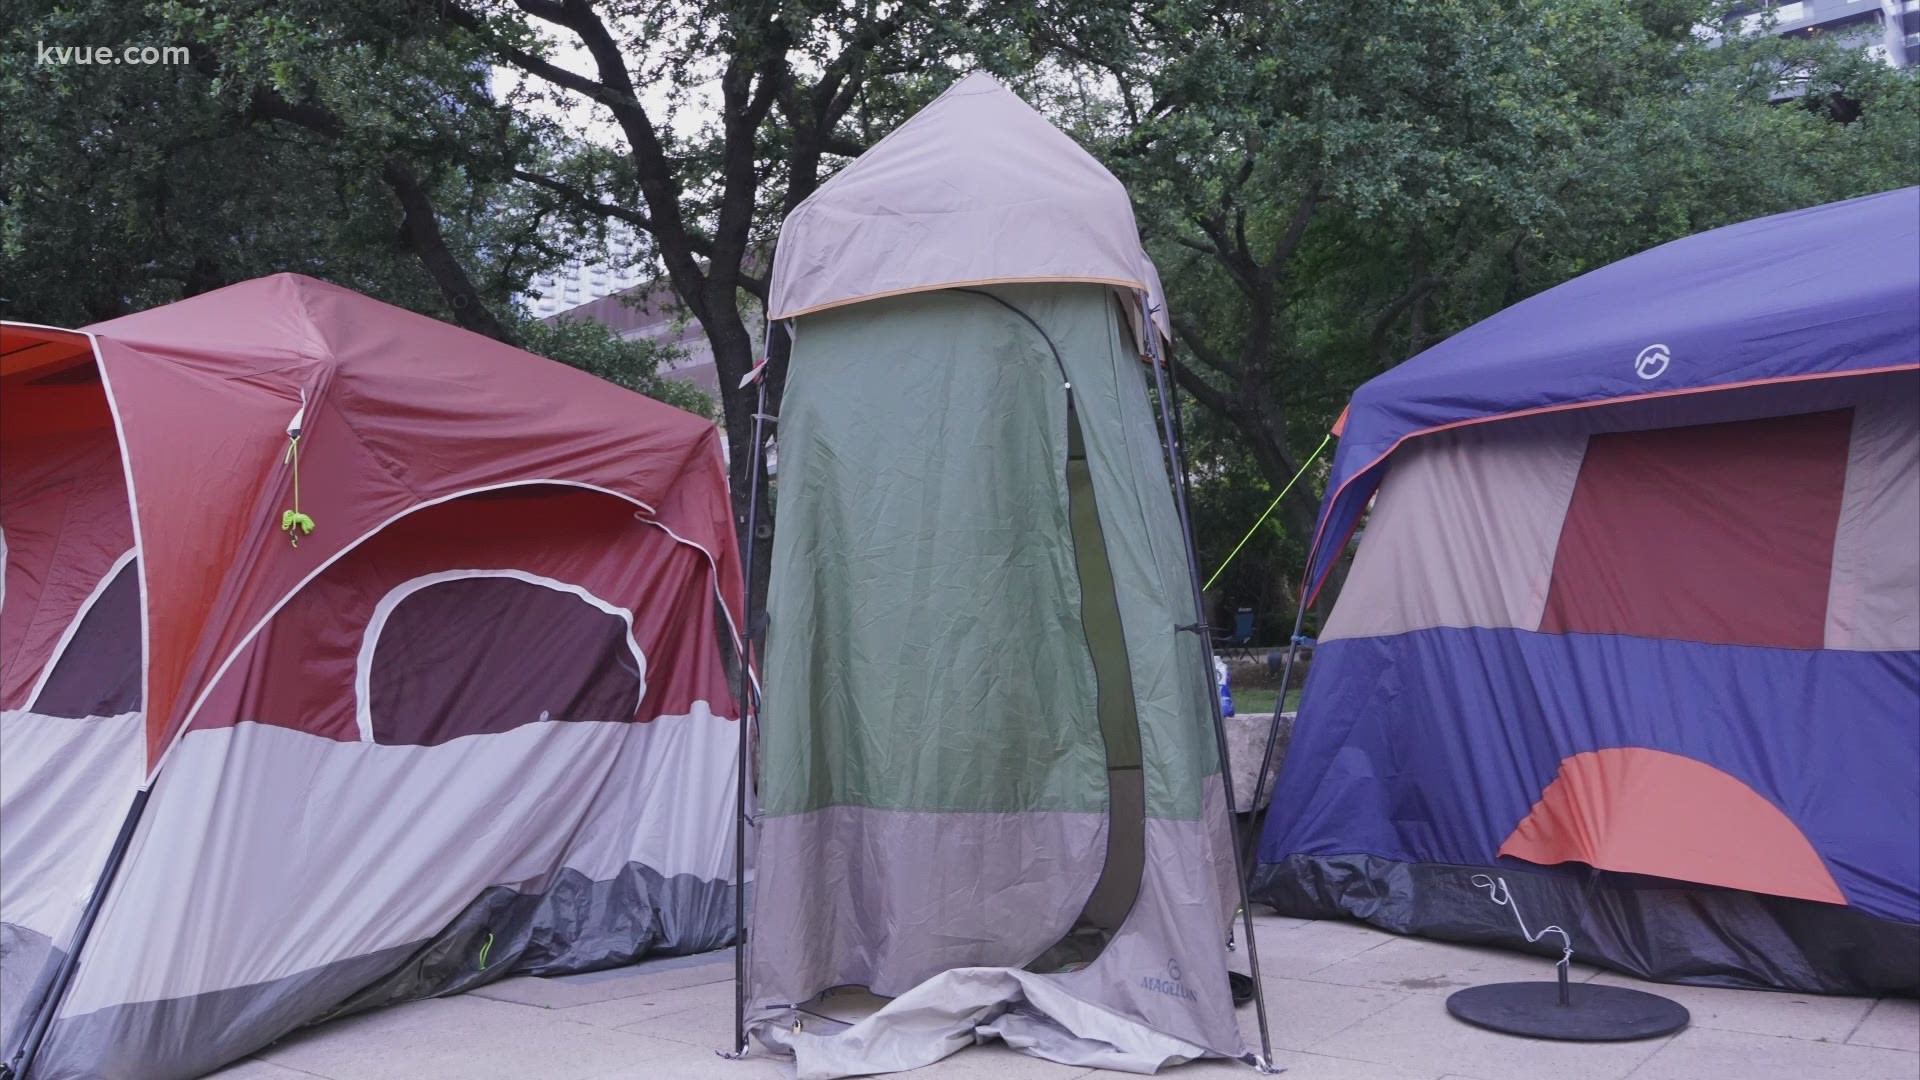 Starting Tuesday, public camping will be illegal in some areas of Austin. On Monday, the City released its plan for how to enforce the rules.